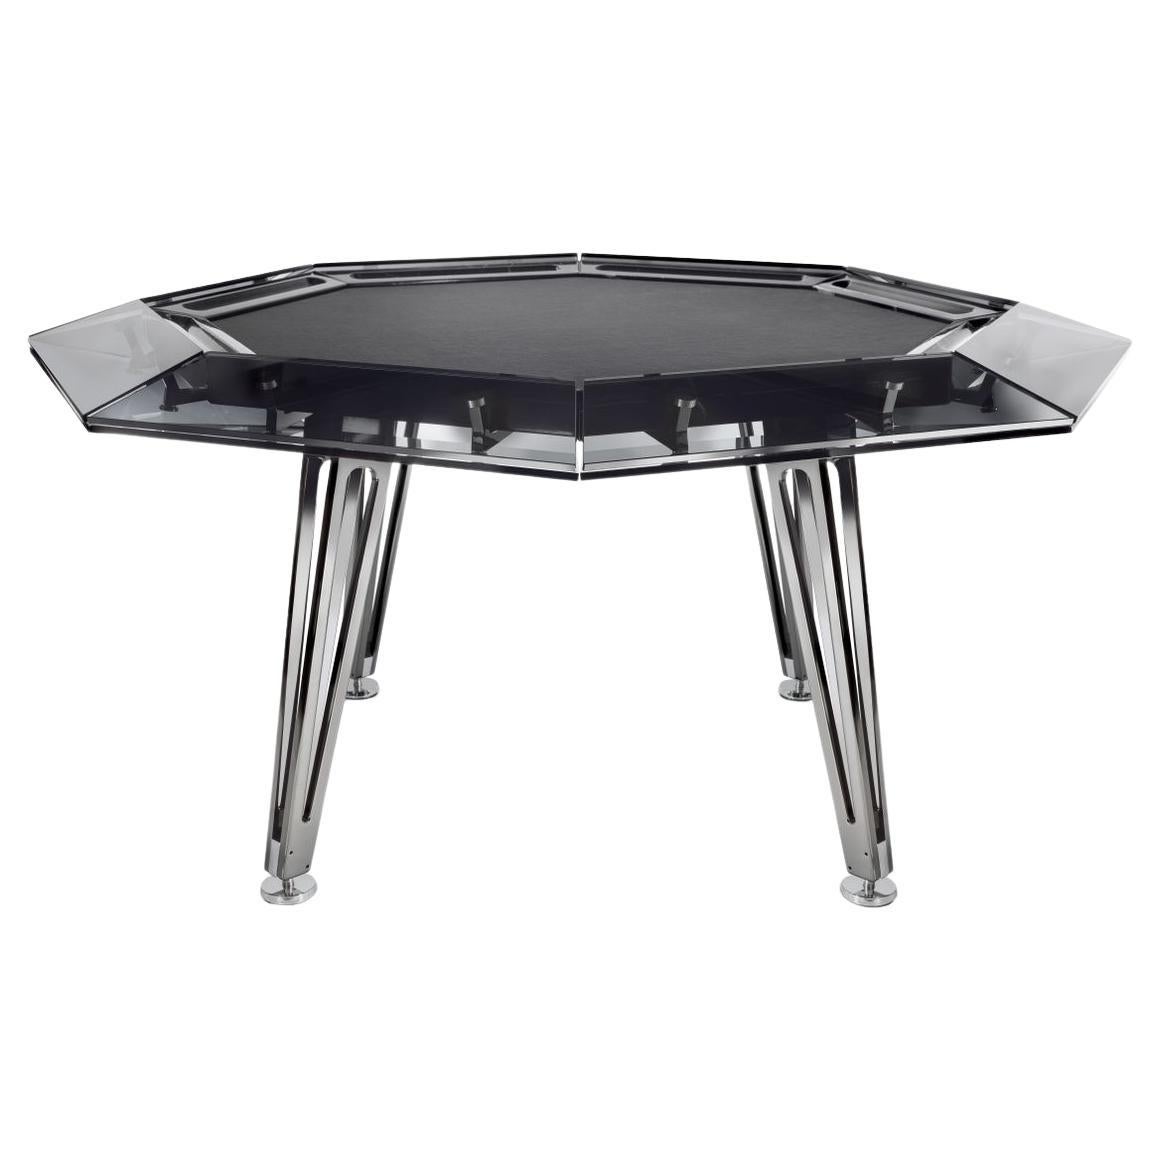 Unootto Black 8 Players Poker Table For Sale